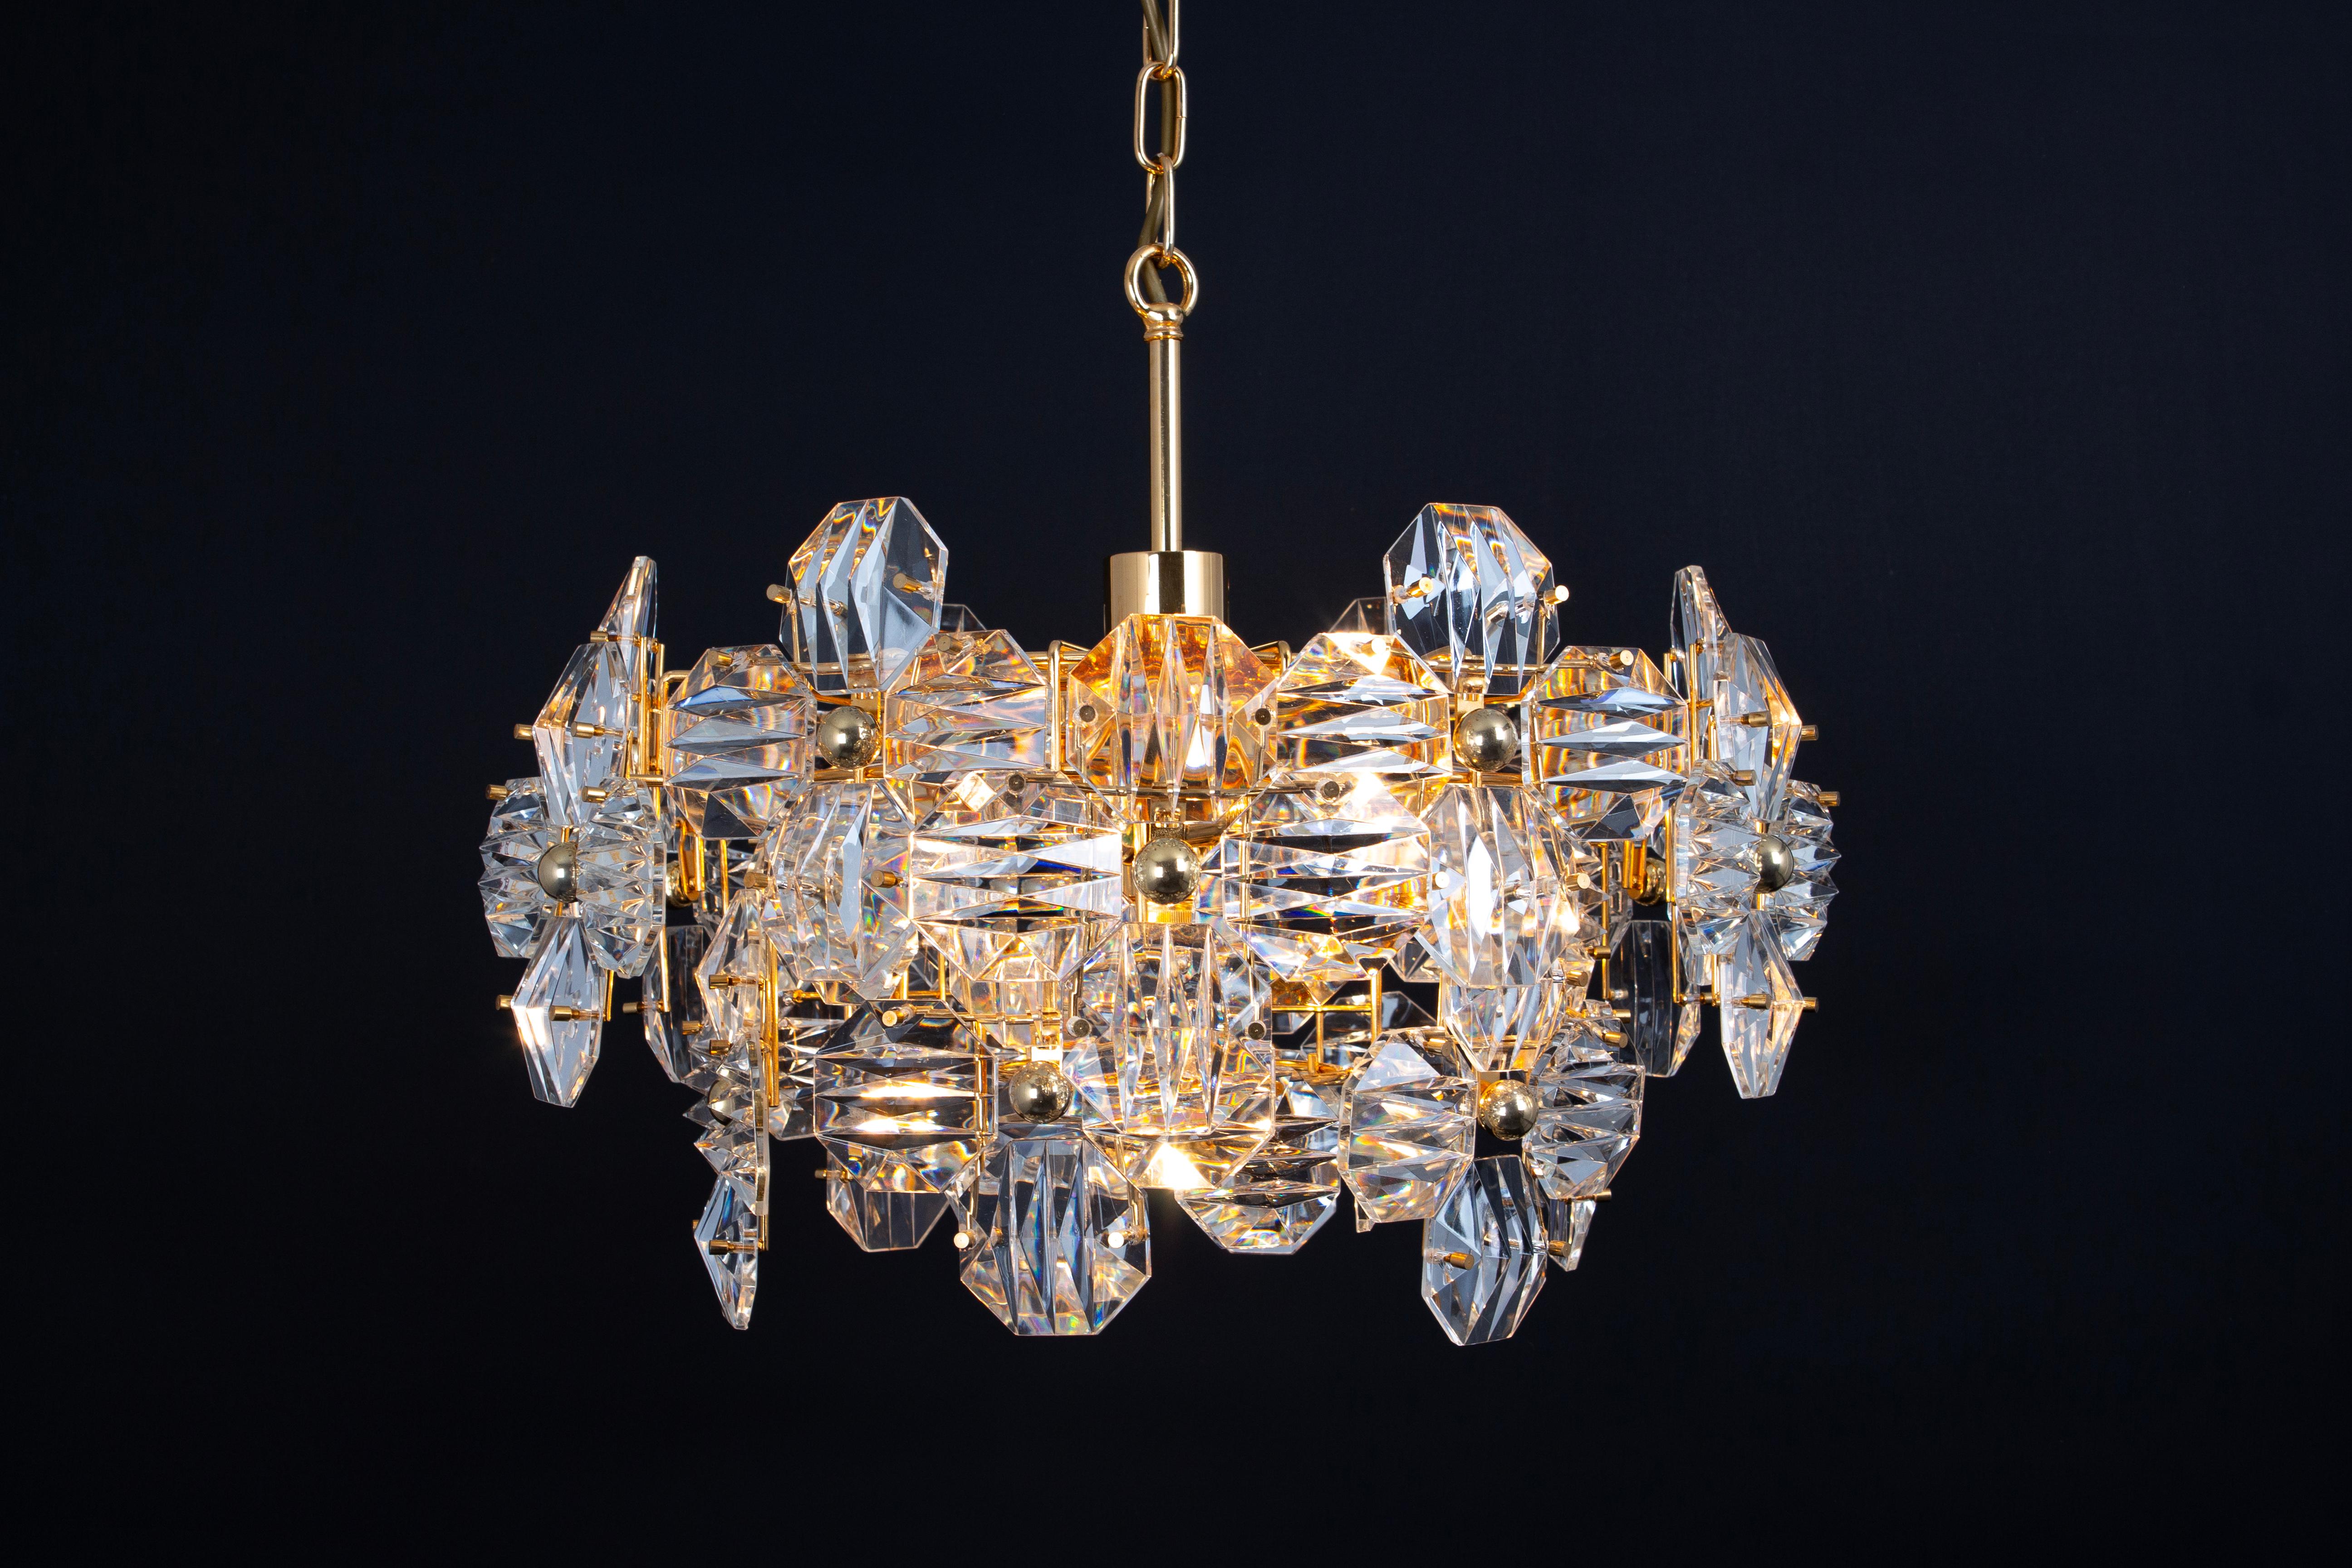 1 of 2 Stunning Chandelier, Brass and Crystal Glass by Kinkeldey, Germany, 1970s For Sale 5